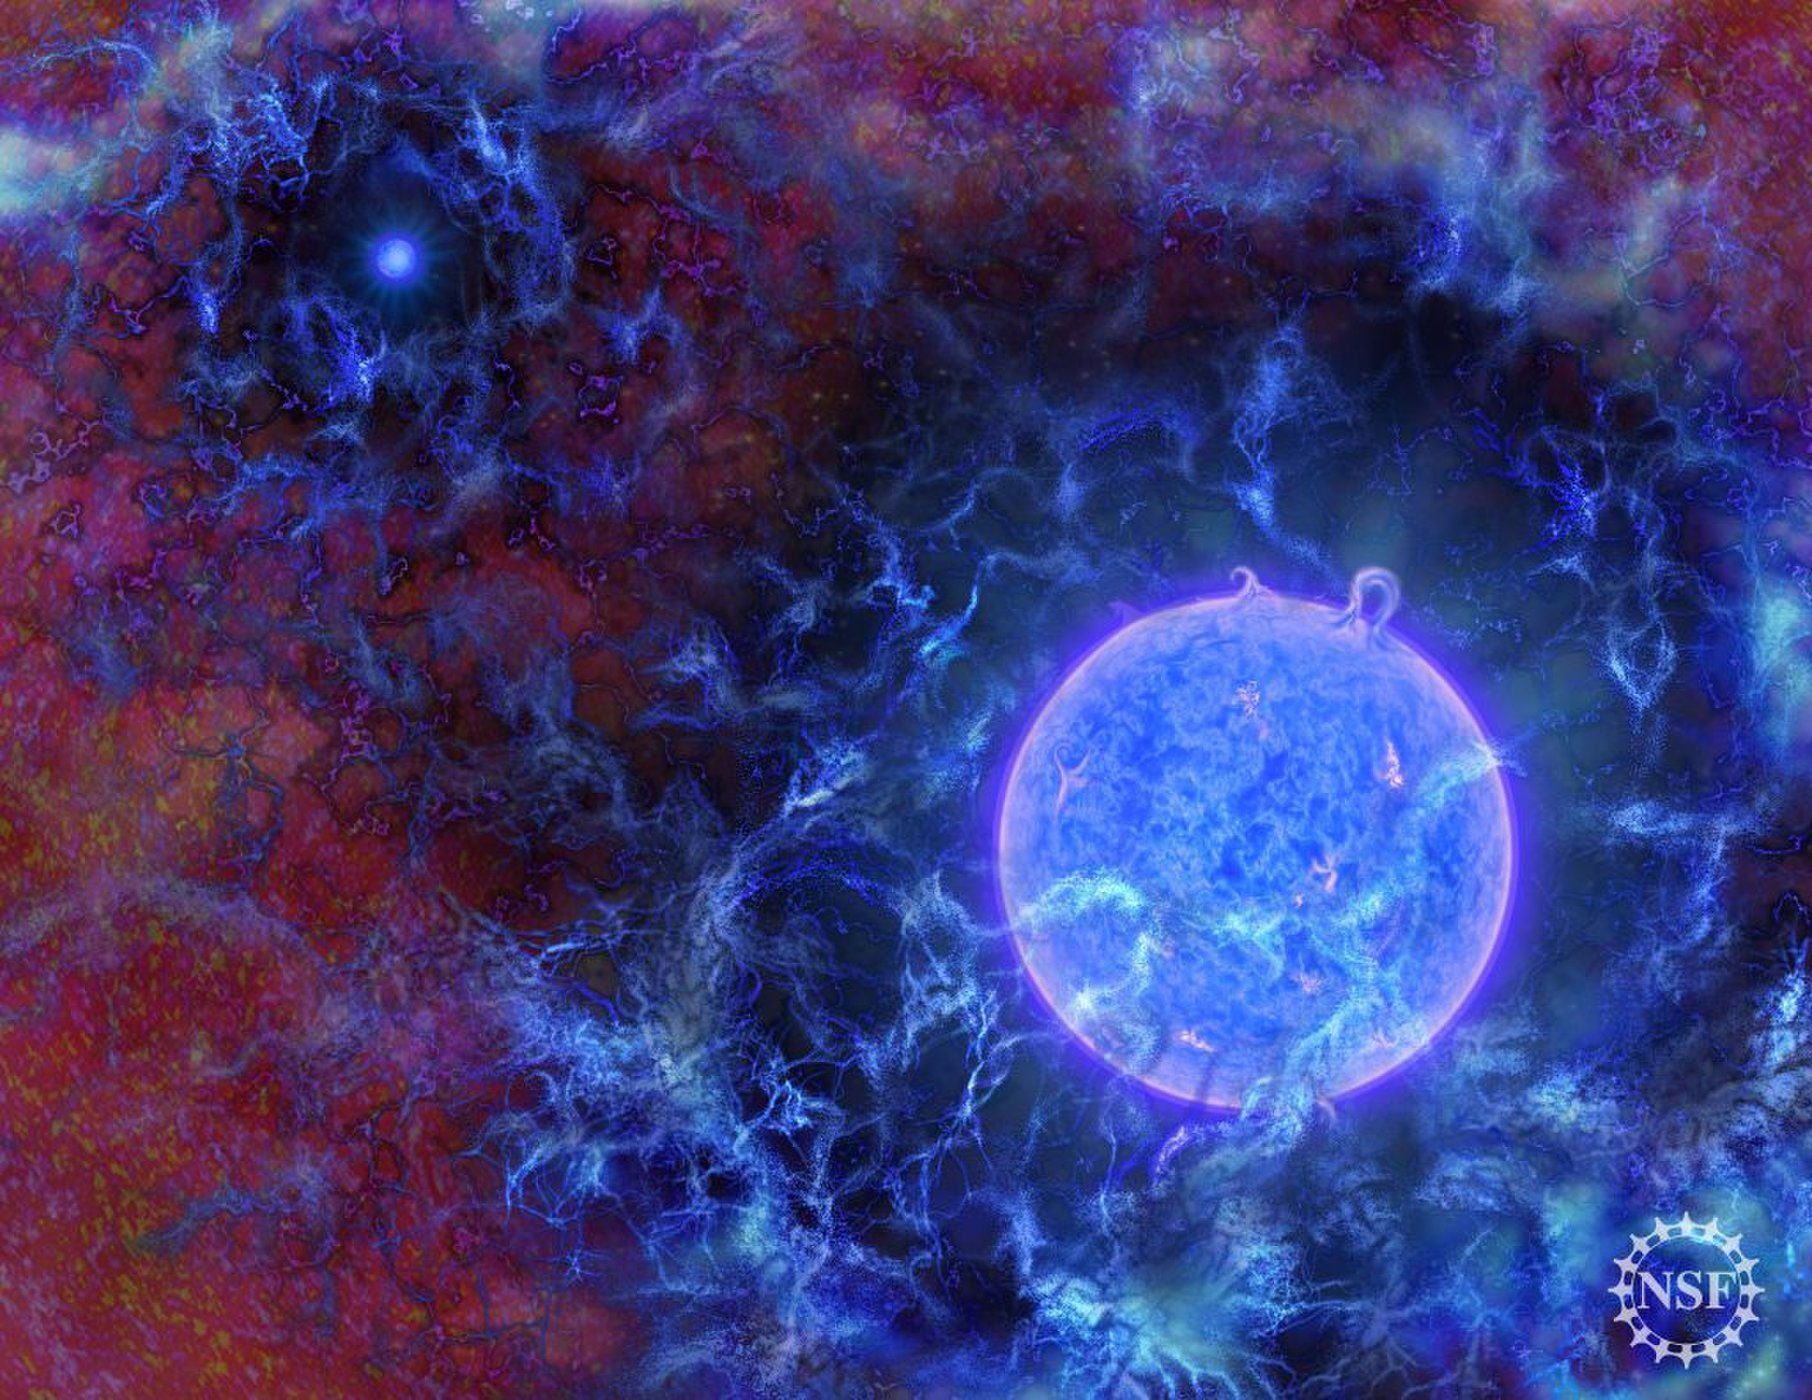 An artist's illustration of what the first stars in the universe may have looked like.